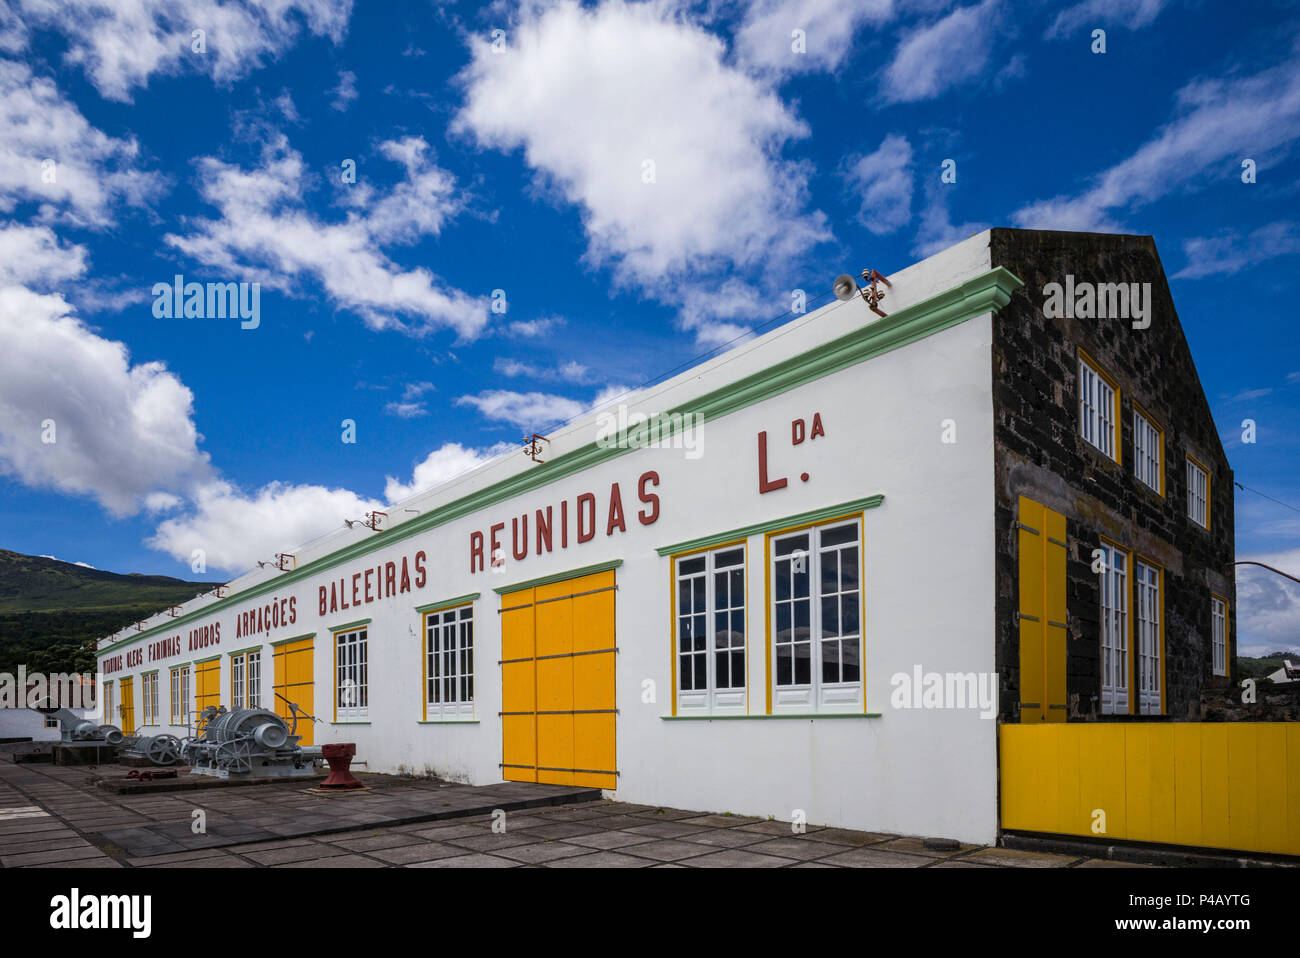 Portugal, Azores, Pico Island, Sao Roque do Pico, Museu da Industria Baleeira, Whaling Industry Museum housed in old whaling factory, exterior Stock Photo